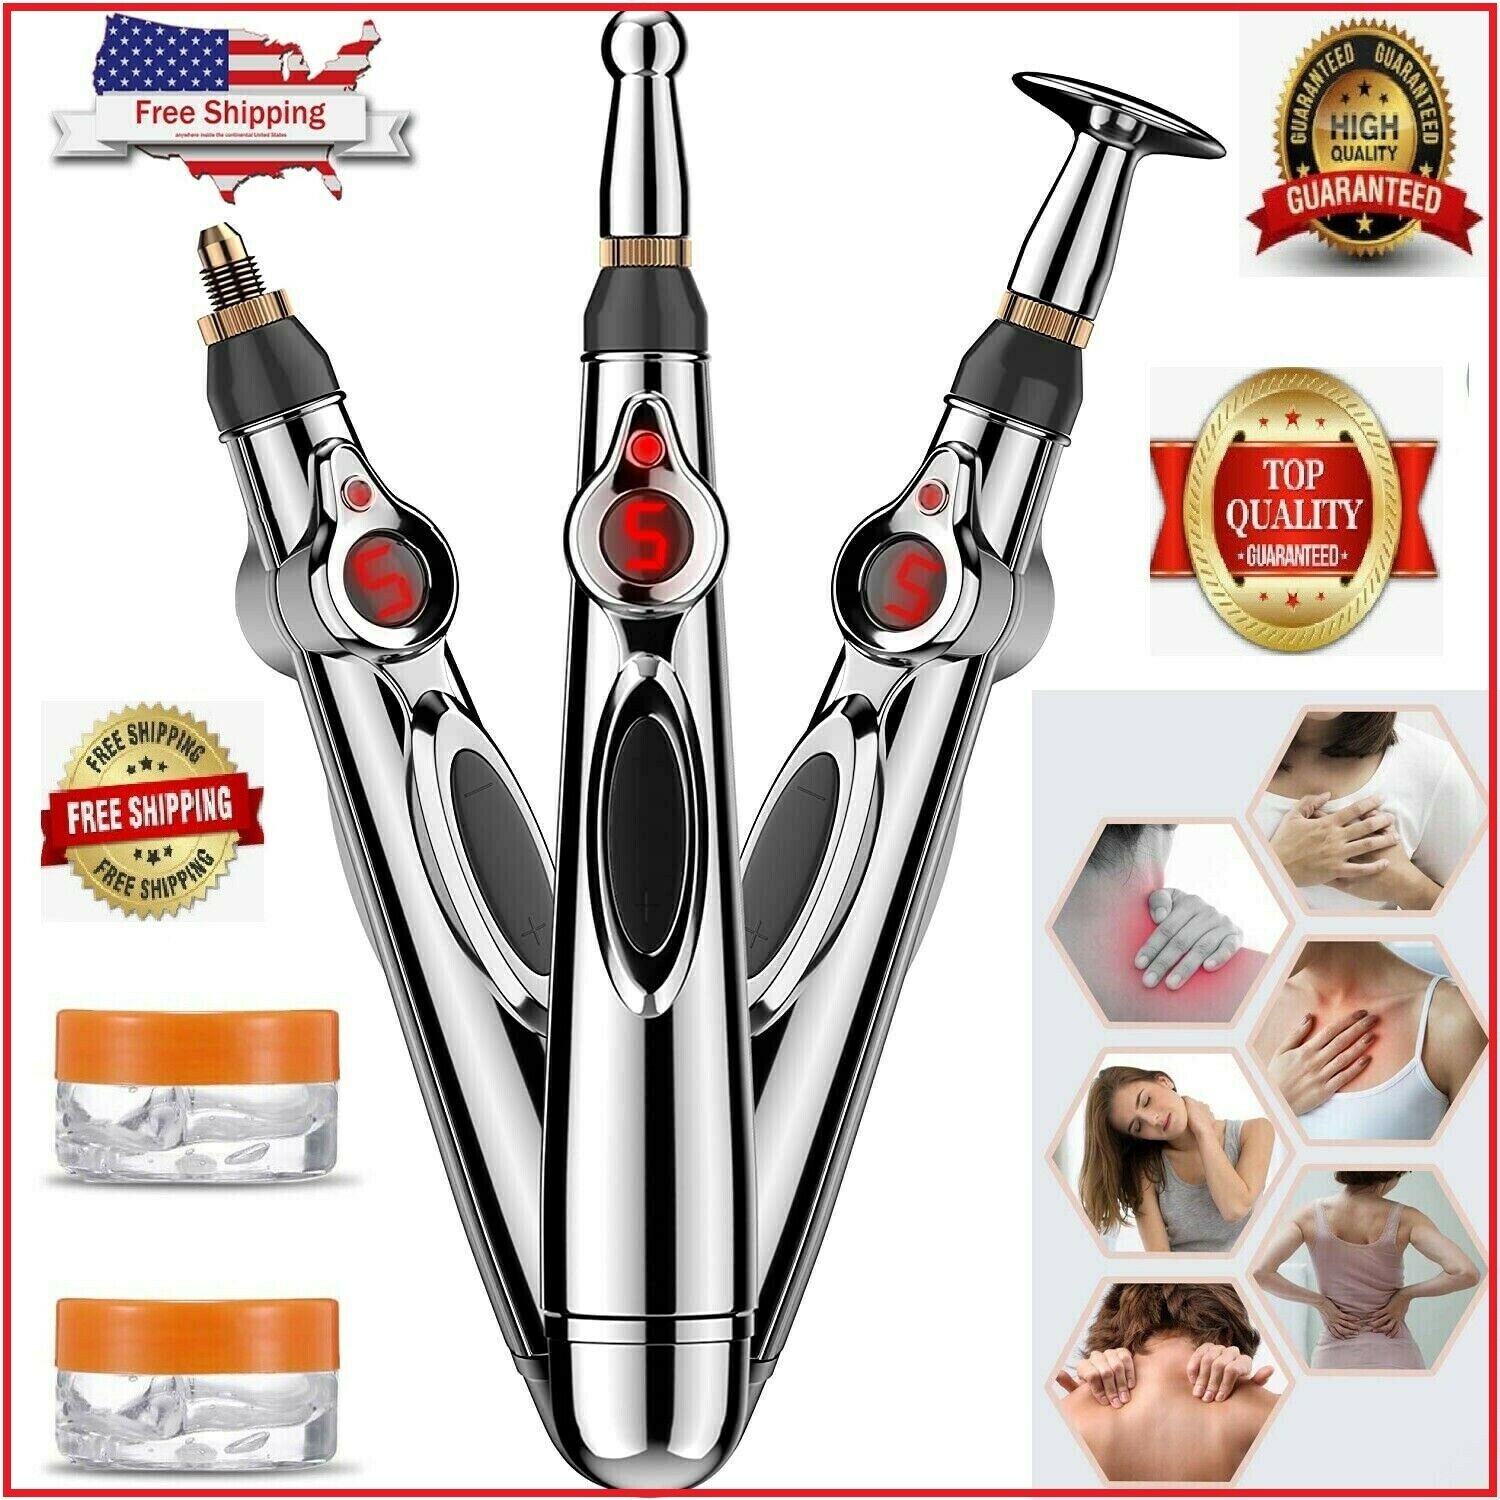 Therapy Acupuncture Electronic Pen Meridian Energy Heal Massage Pain Relief Usa